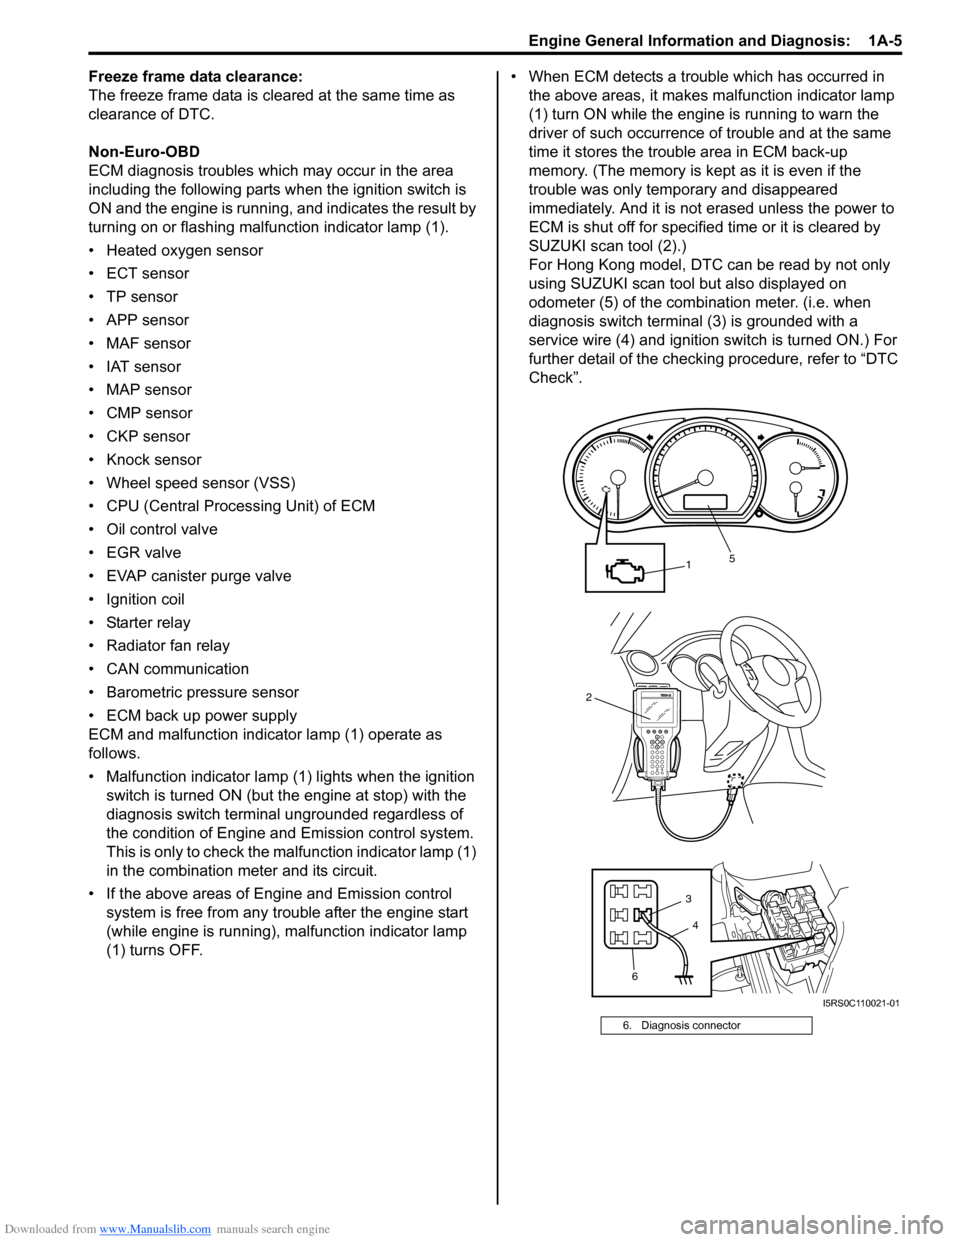 SUZUKI SWIFT 2005 2.G Service Workshop Manual Downloaded from www.Manualslib.com manuals search engine Engine General Information and Diagnosis:  1A-5
Freeze frame data clearance:
The freeze frame data is cleared at the same time as 
clearance of